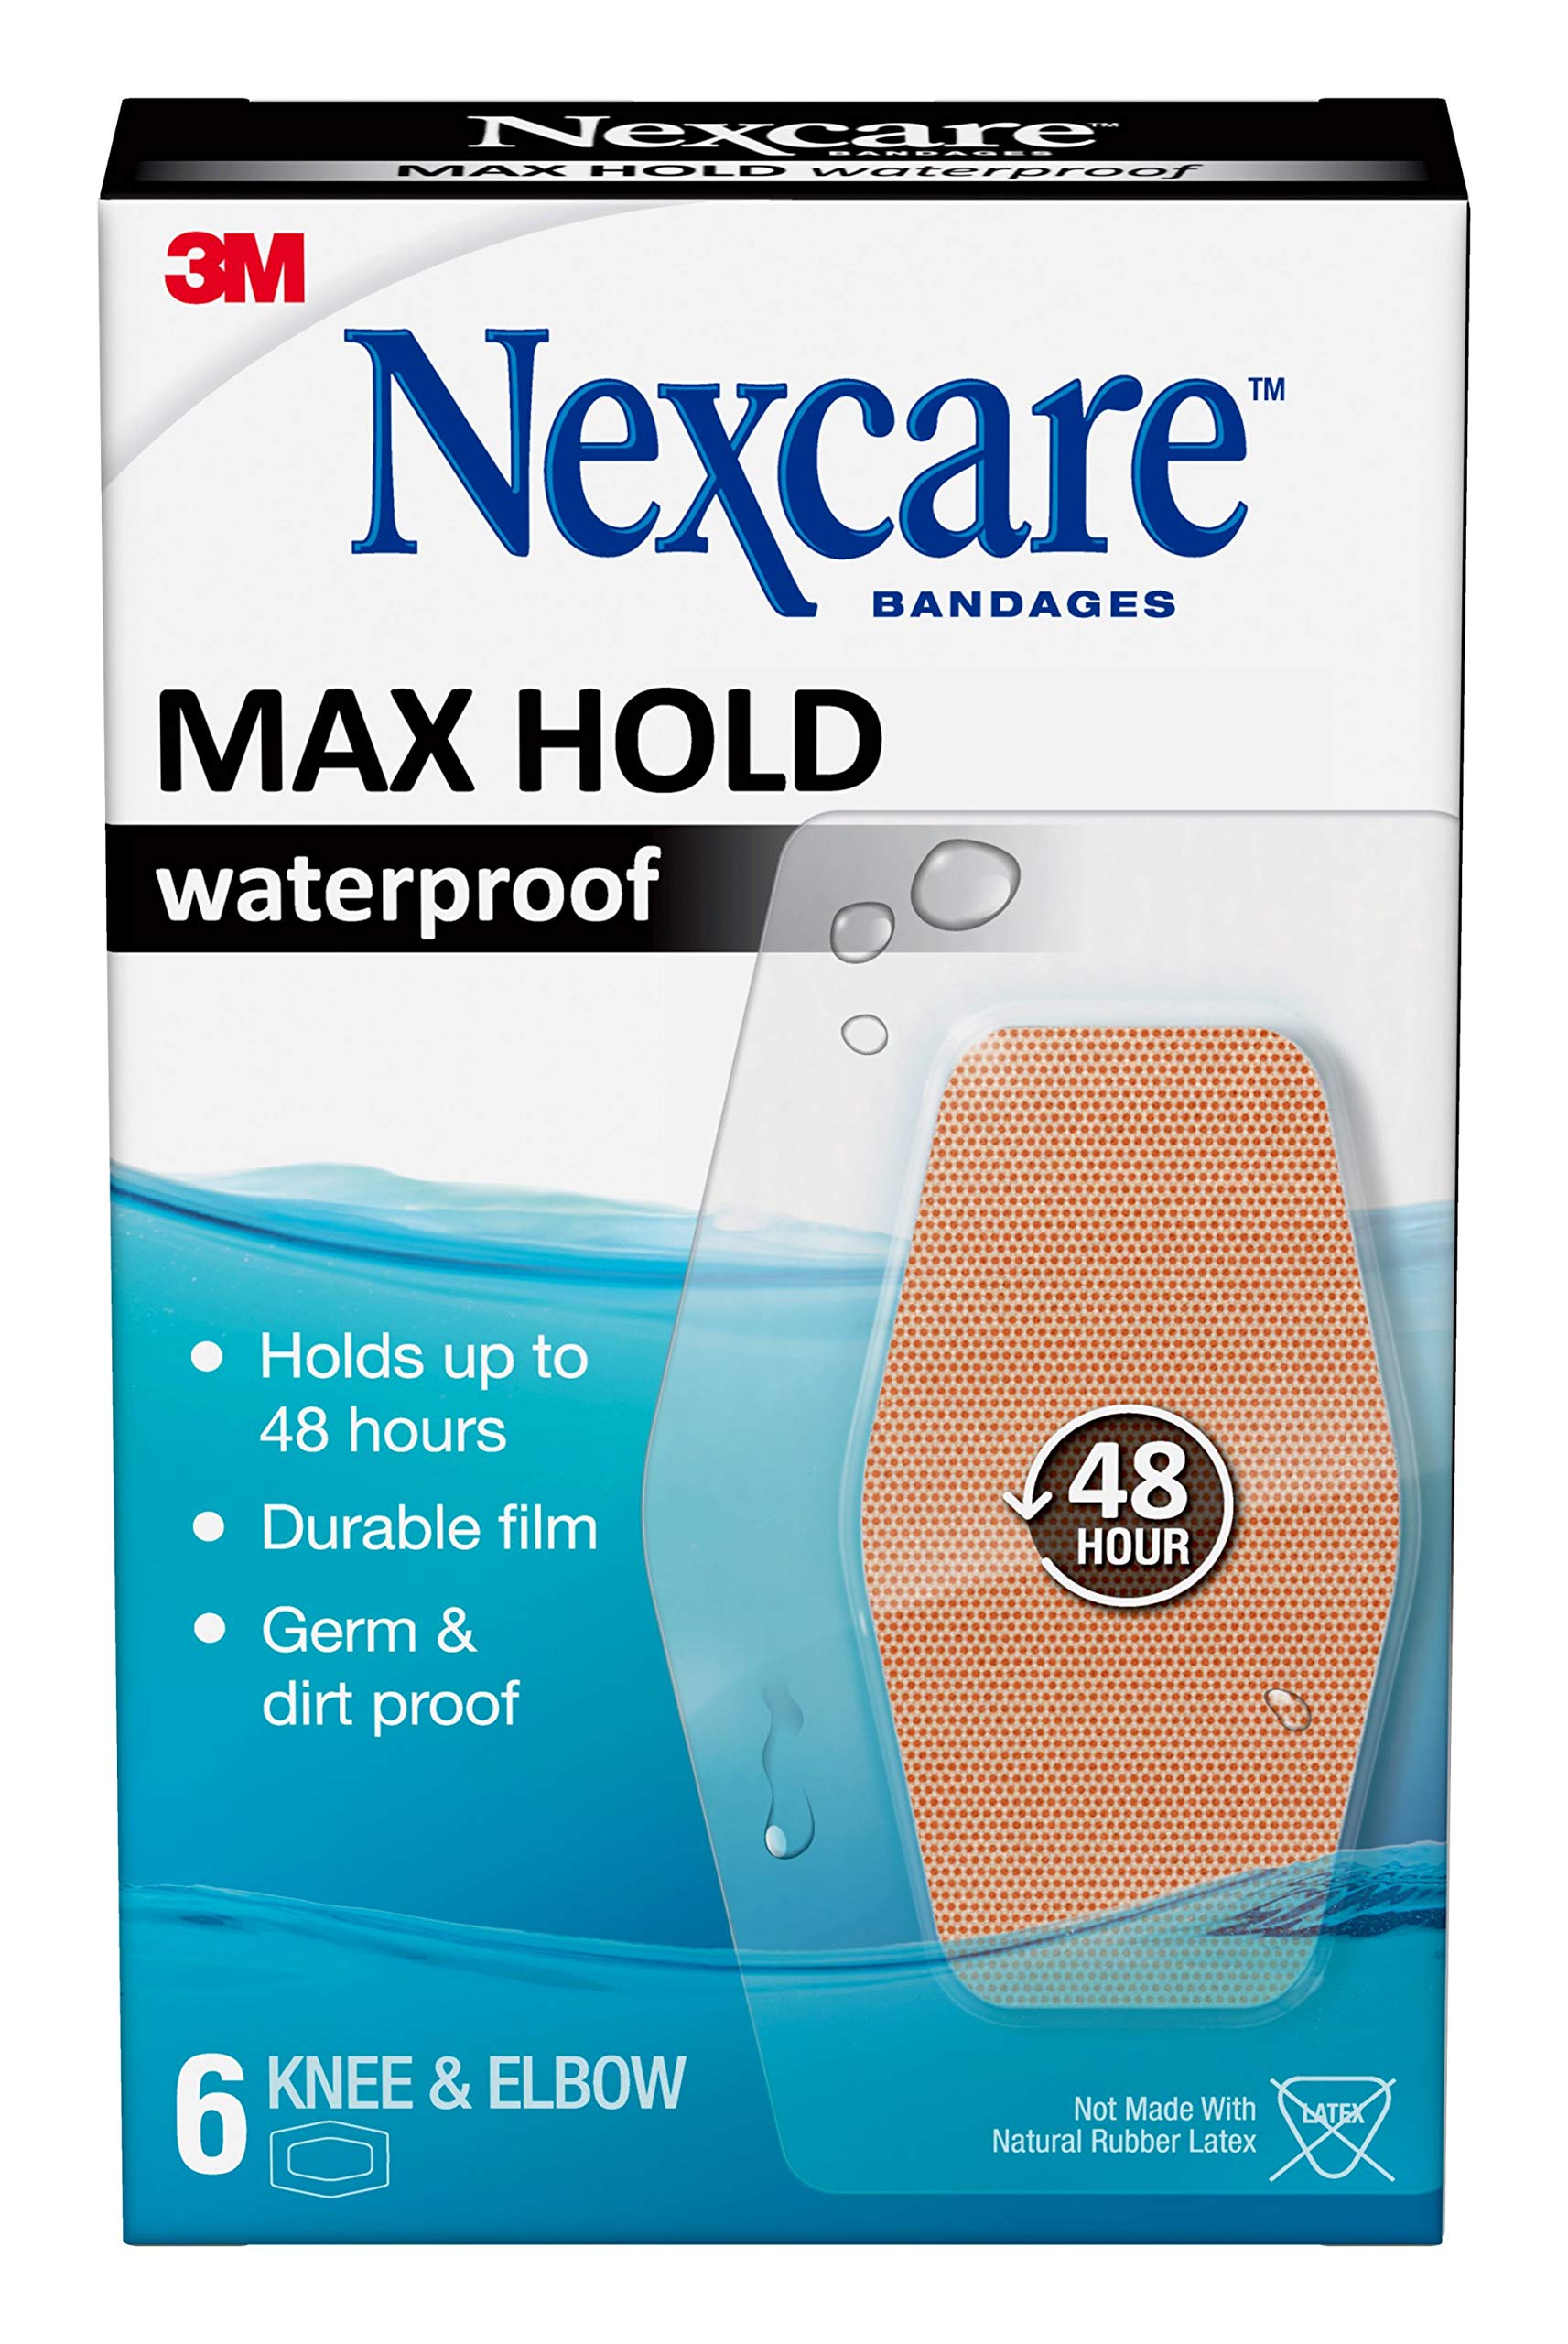 Nexcare Max Hold Waterproof Bandages, Comfortable, Low-Profile Film Fits Close To The Skin, Knee & Elbow, 2.38 x 3.5 in, 6 Count